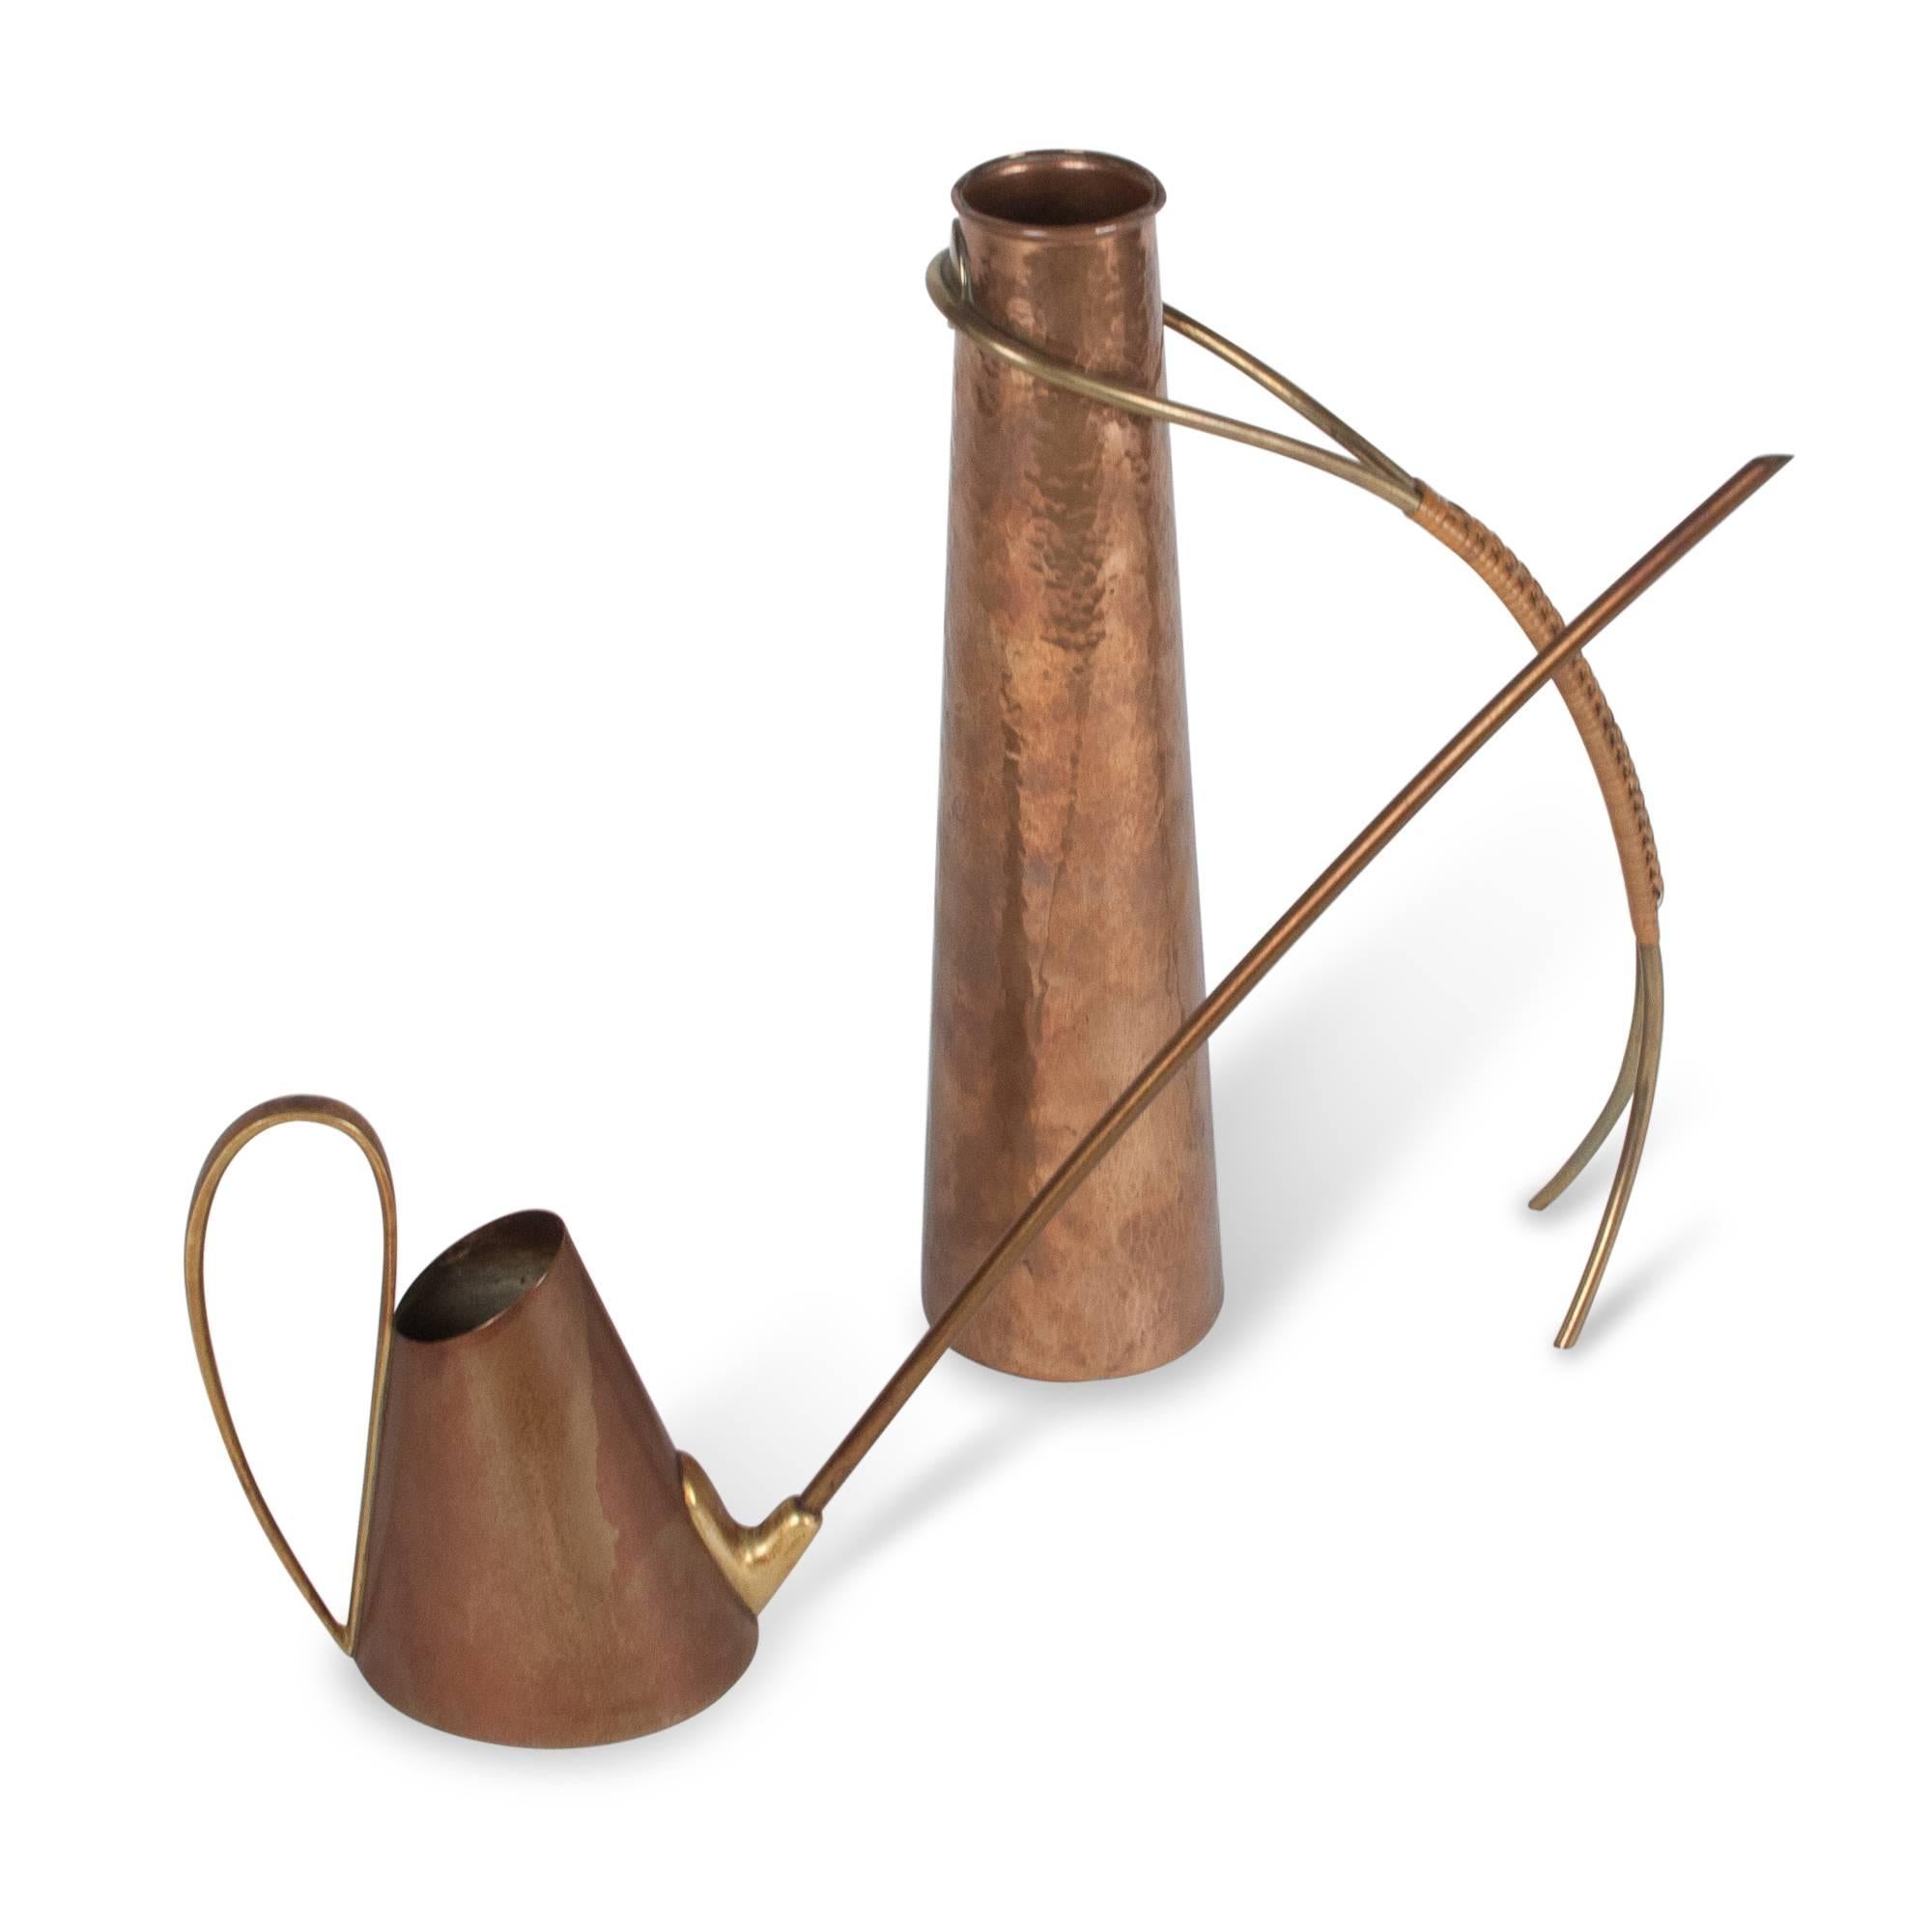 Two watering cans:
On left: Copper watering can, cone shaped body, with rounded handle and long spout, Austria, 1950s. Length from spout to handle 14 in, diameter at bottom 3 1/2 in, height to top of spout 10 in.  

On right: Hammered copper